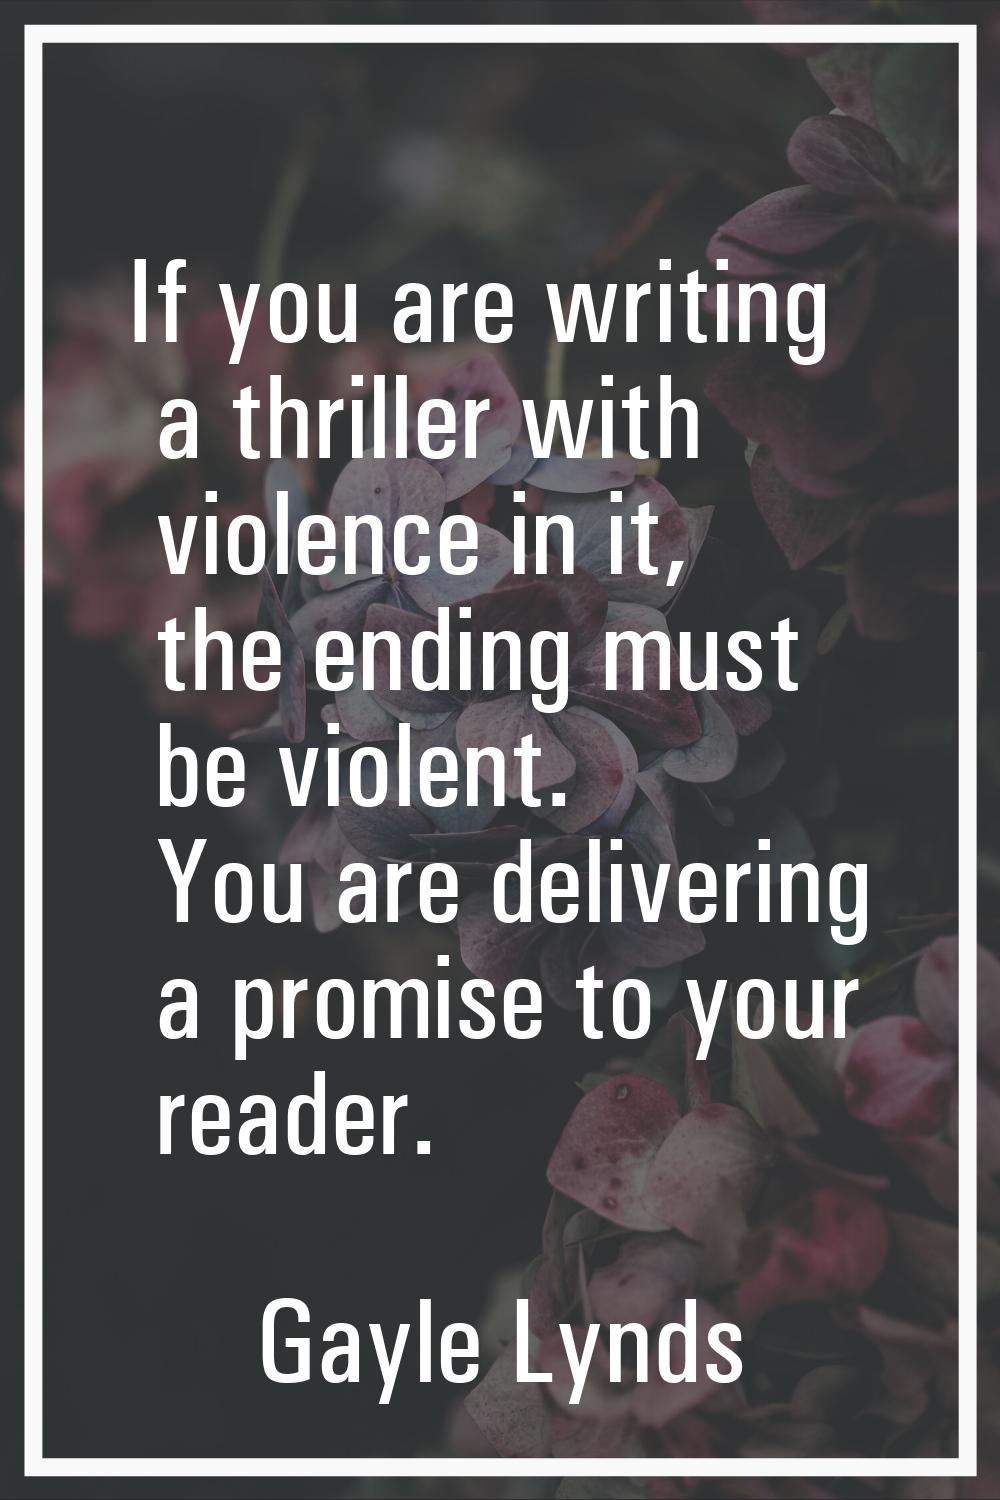 If you are writing a thriller with violence in it, the ending must be violent. You are delivering a